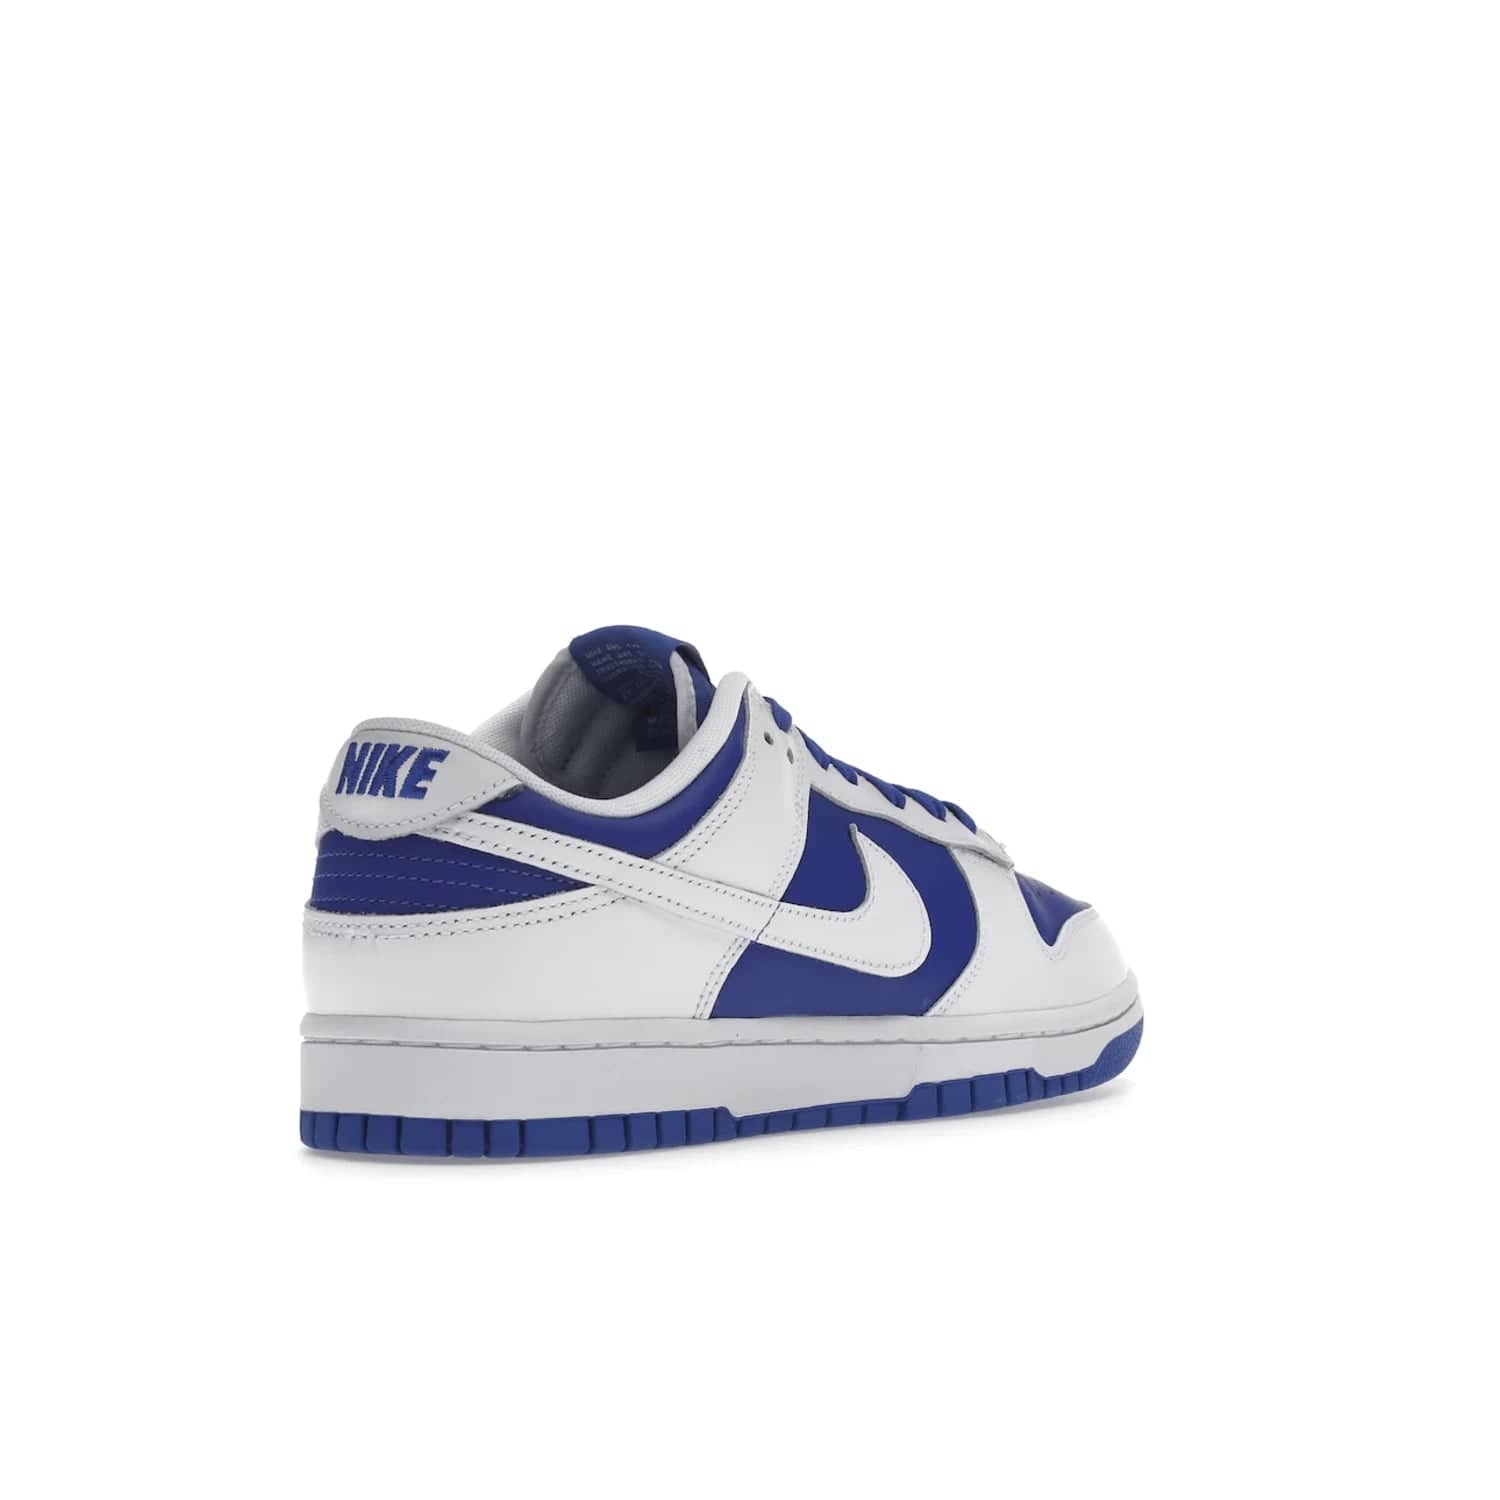 Nike Dunk Low Racer Blue White - Image 32 - Only at www.BallersClubKickz.com - Sleek Racer Blue leather upper and white leather overlays make up the Nike Dunk Low Racer Blue White. Woven tag and heel embroidery for a 1985 Dunk look with a matching EVA foam sole completes the classic colorway.